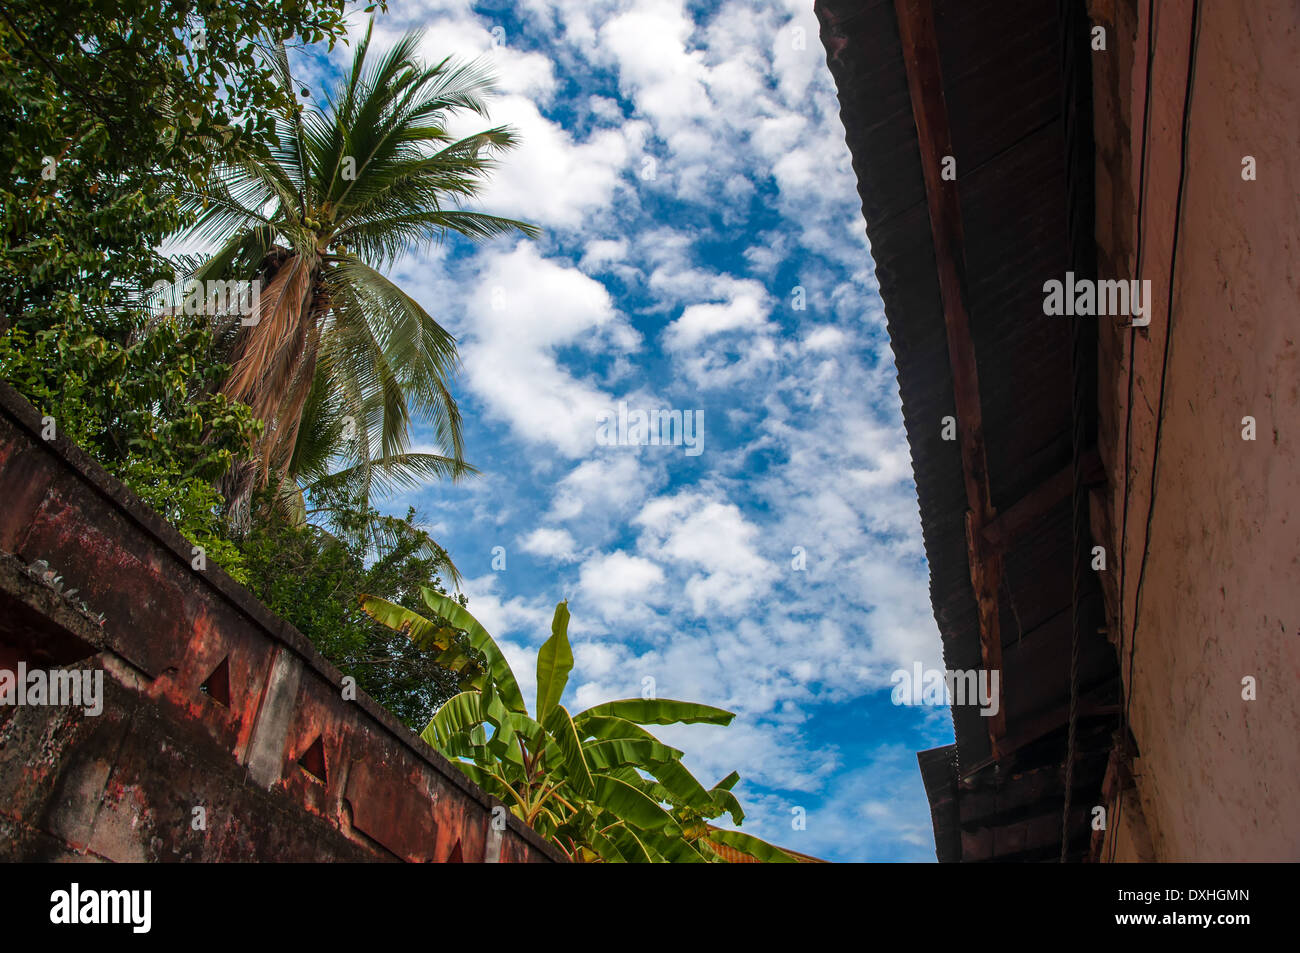 A blue sky and palm trees in the old town of Honda, Colombia Stock Photo